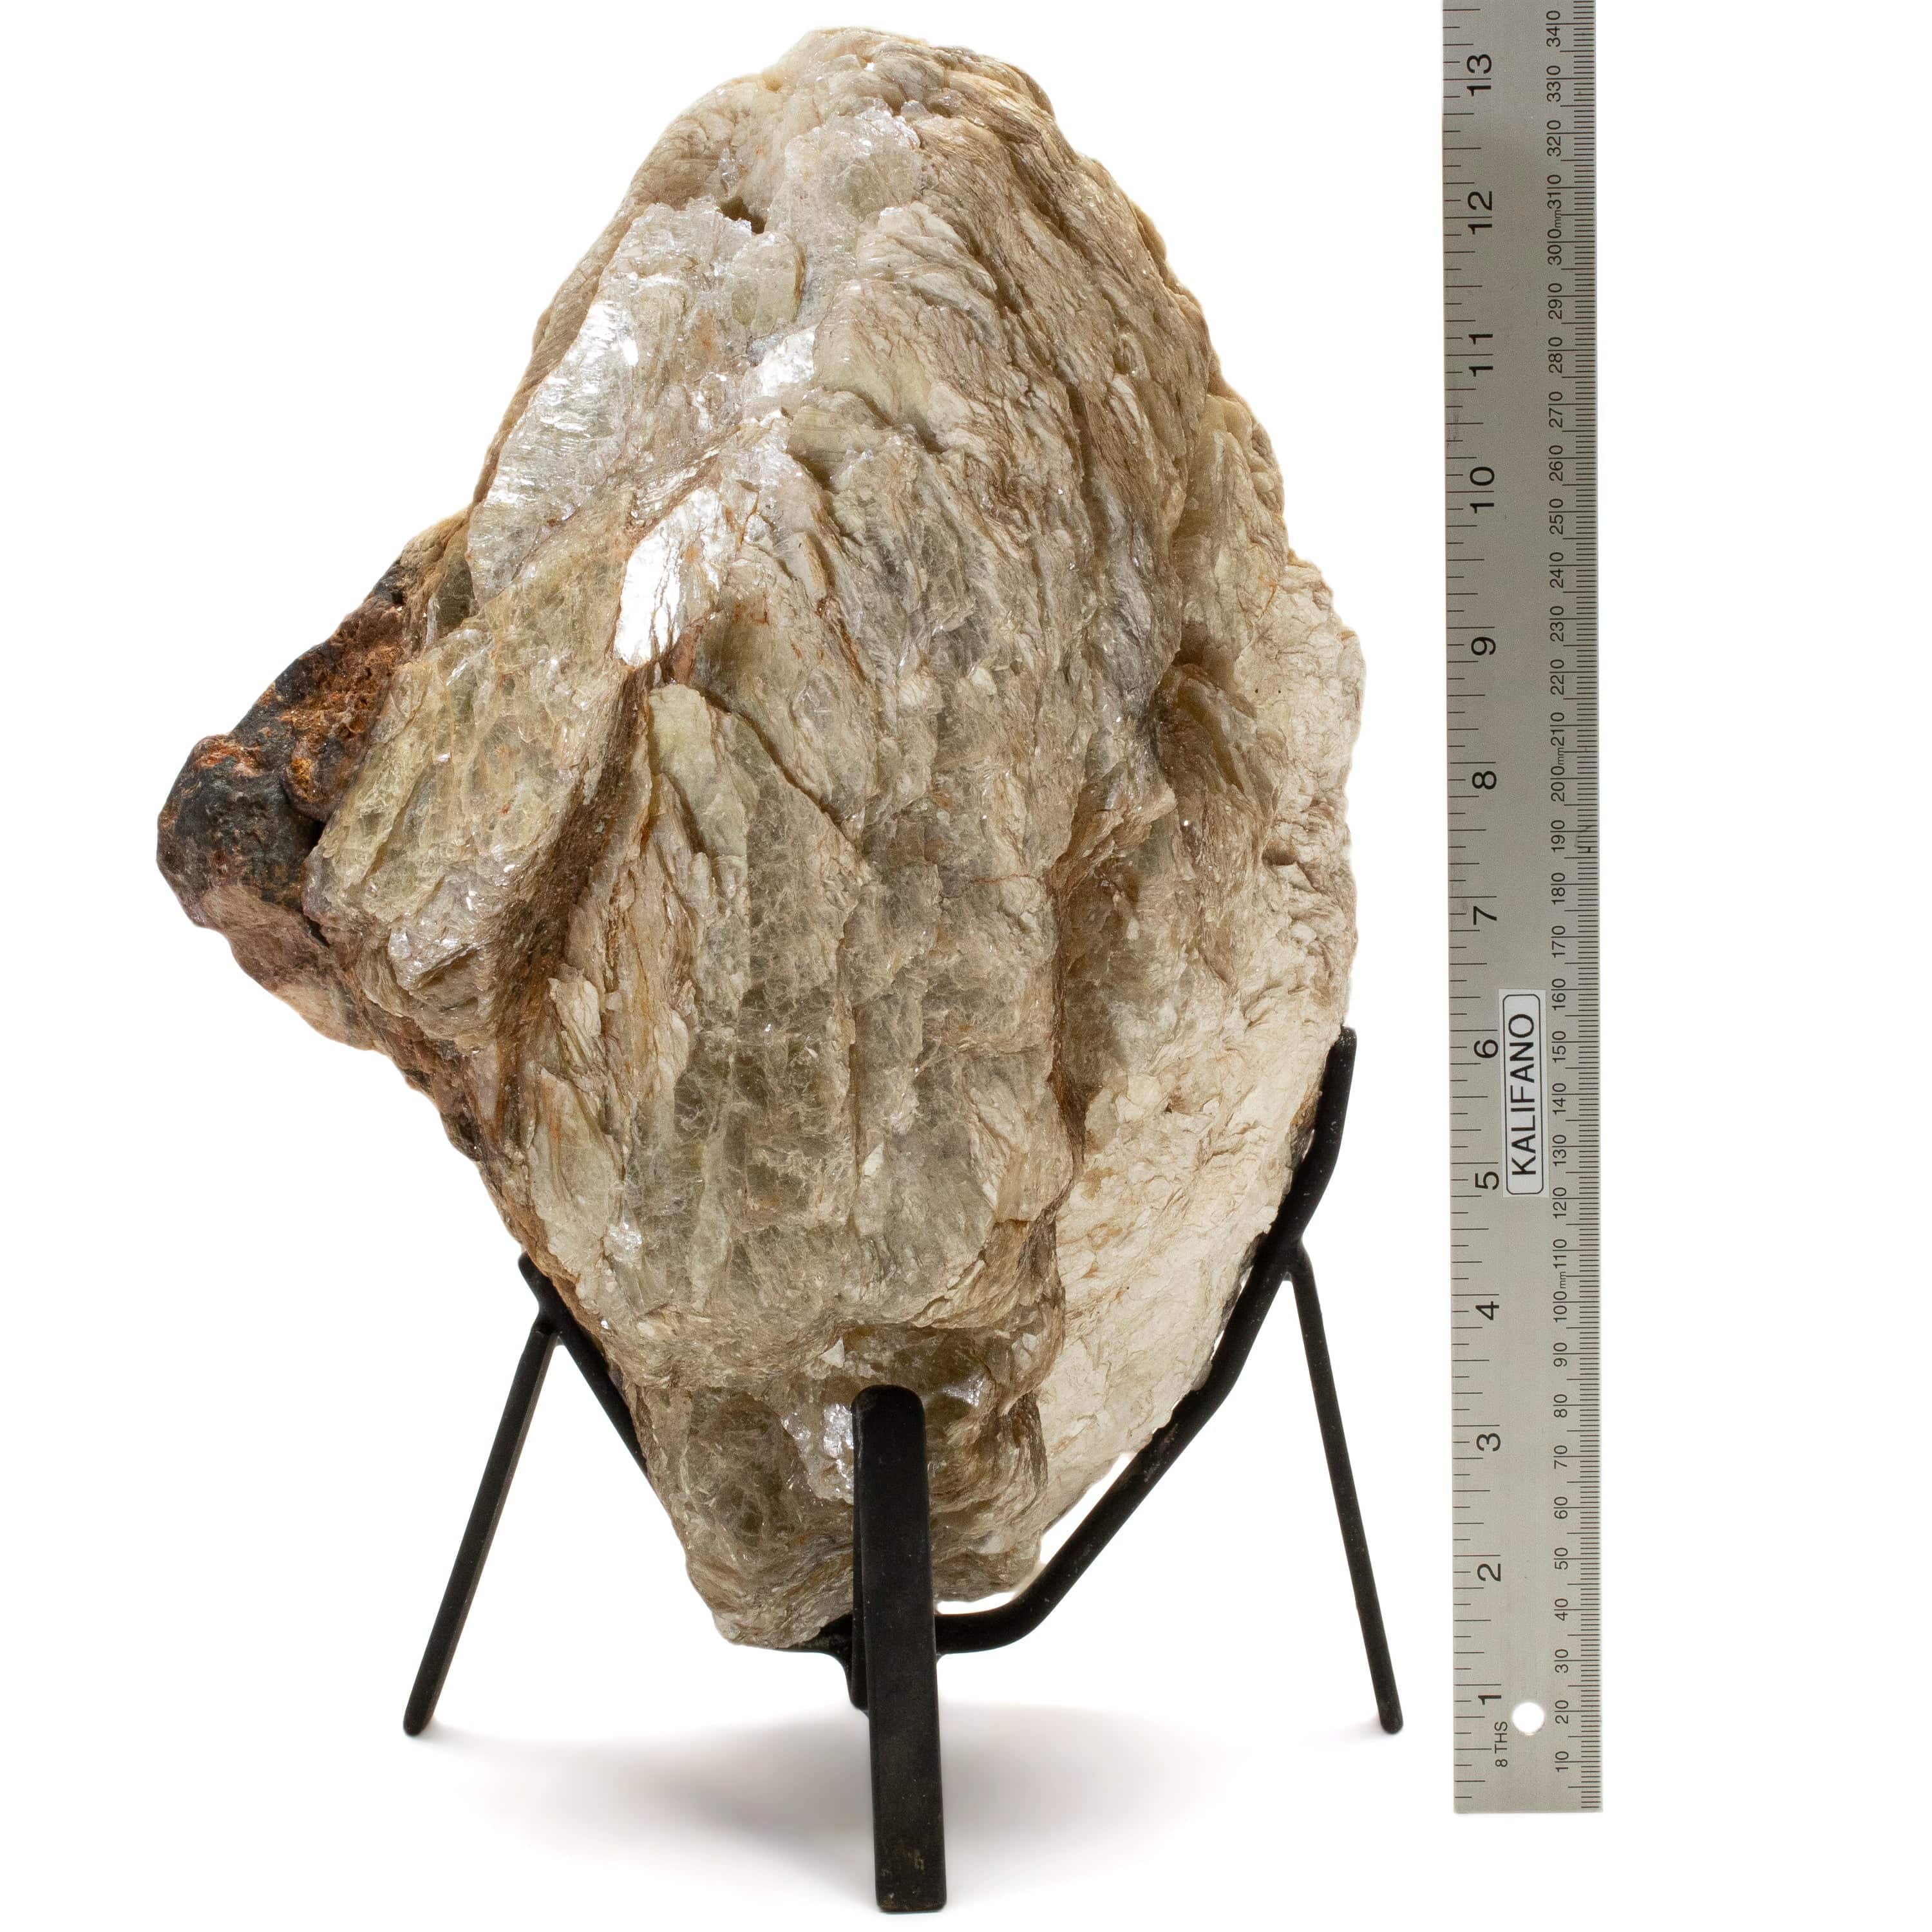 Kalifano Mica Natural Mica on Custom Stand from Brazil - 13" / 18 lbs MC4100.001